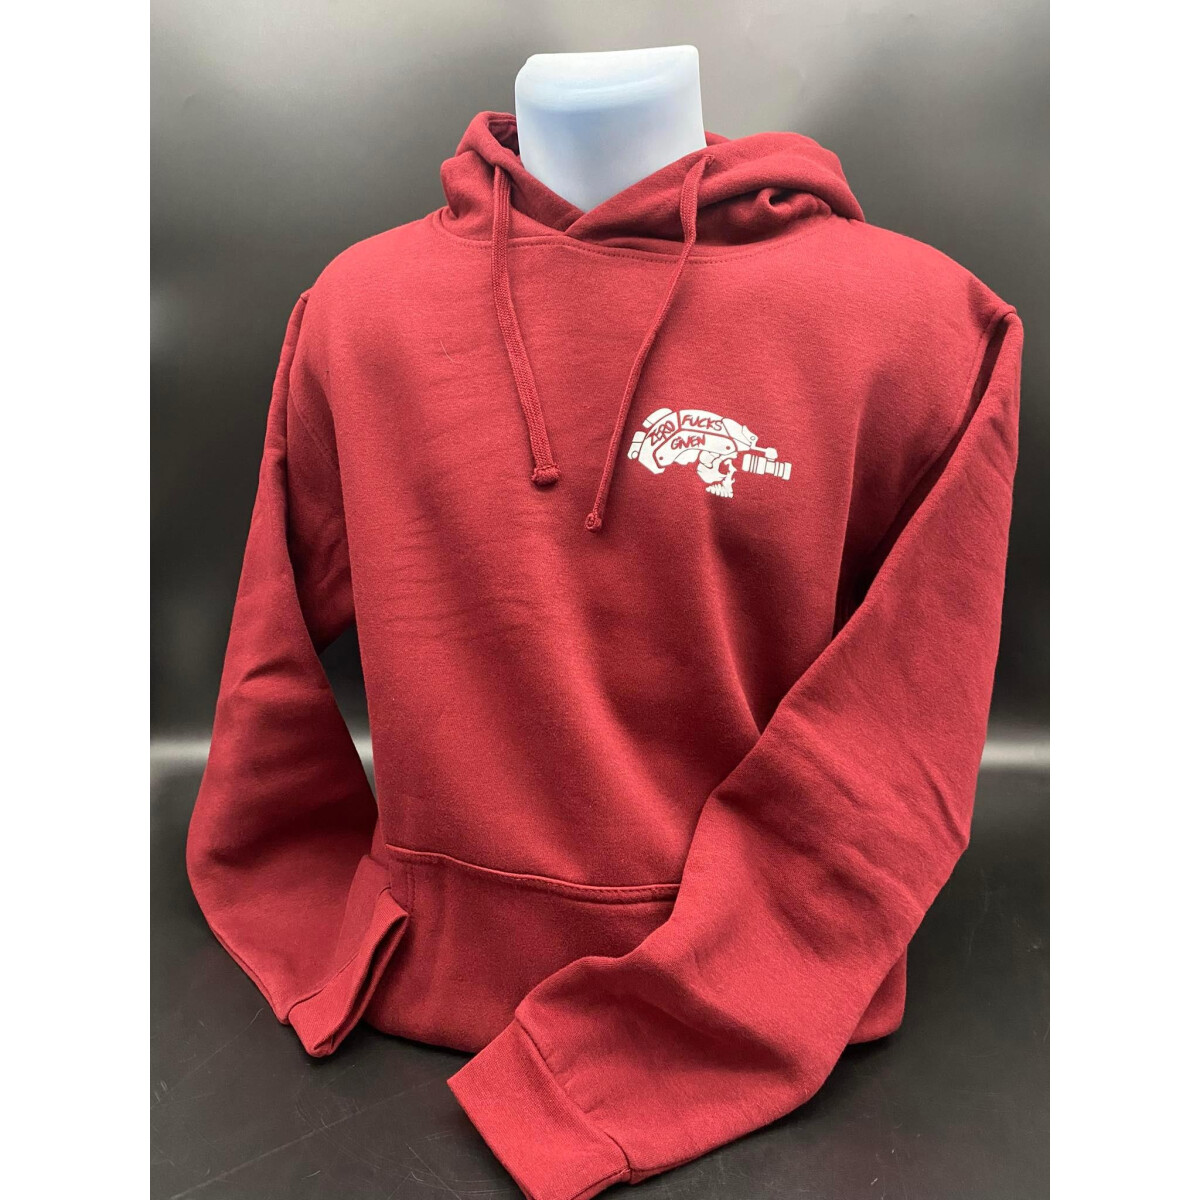 Airsofter Hoodie Red "Zero Fucks Given" M...